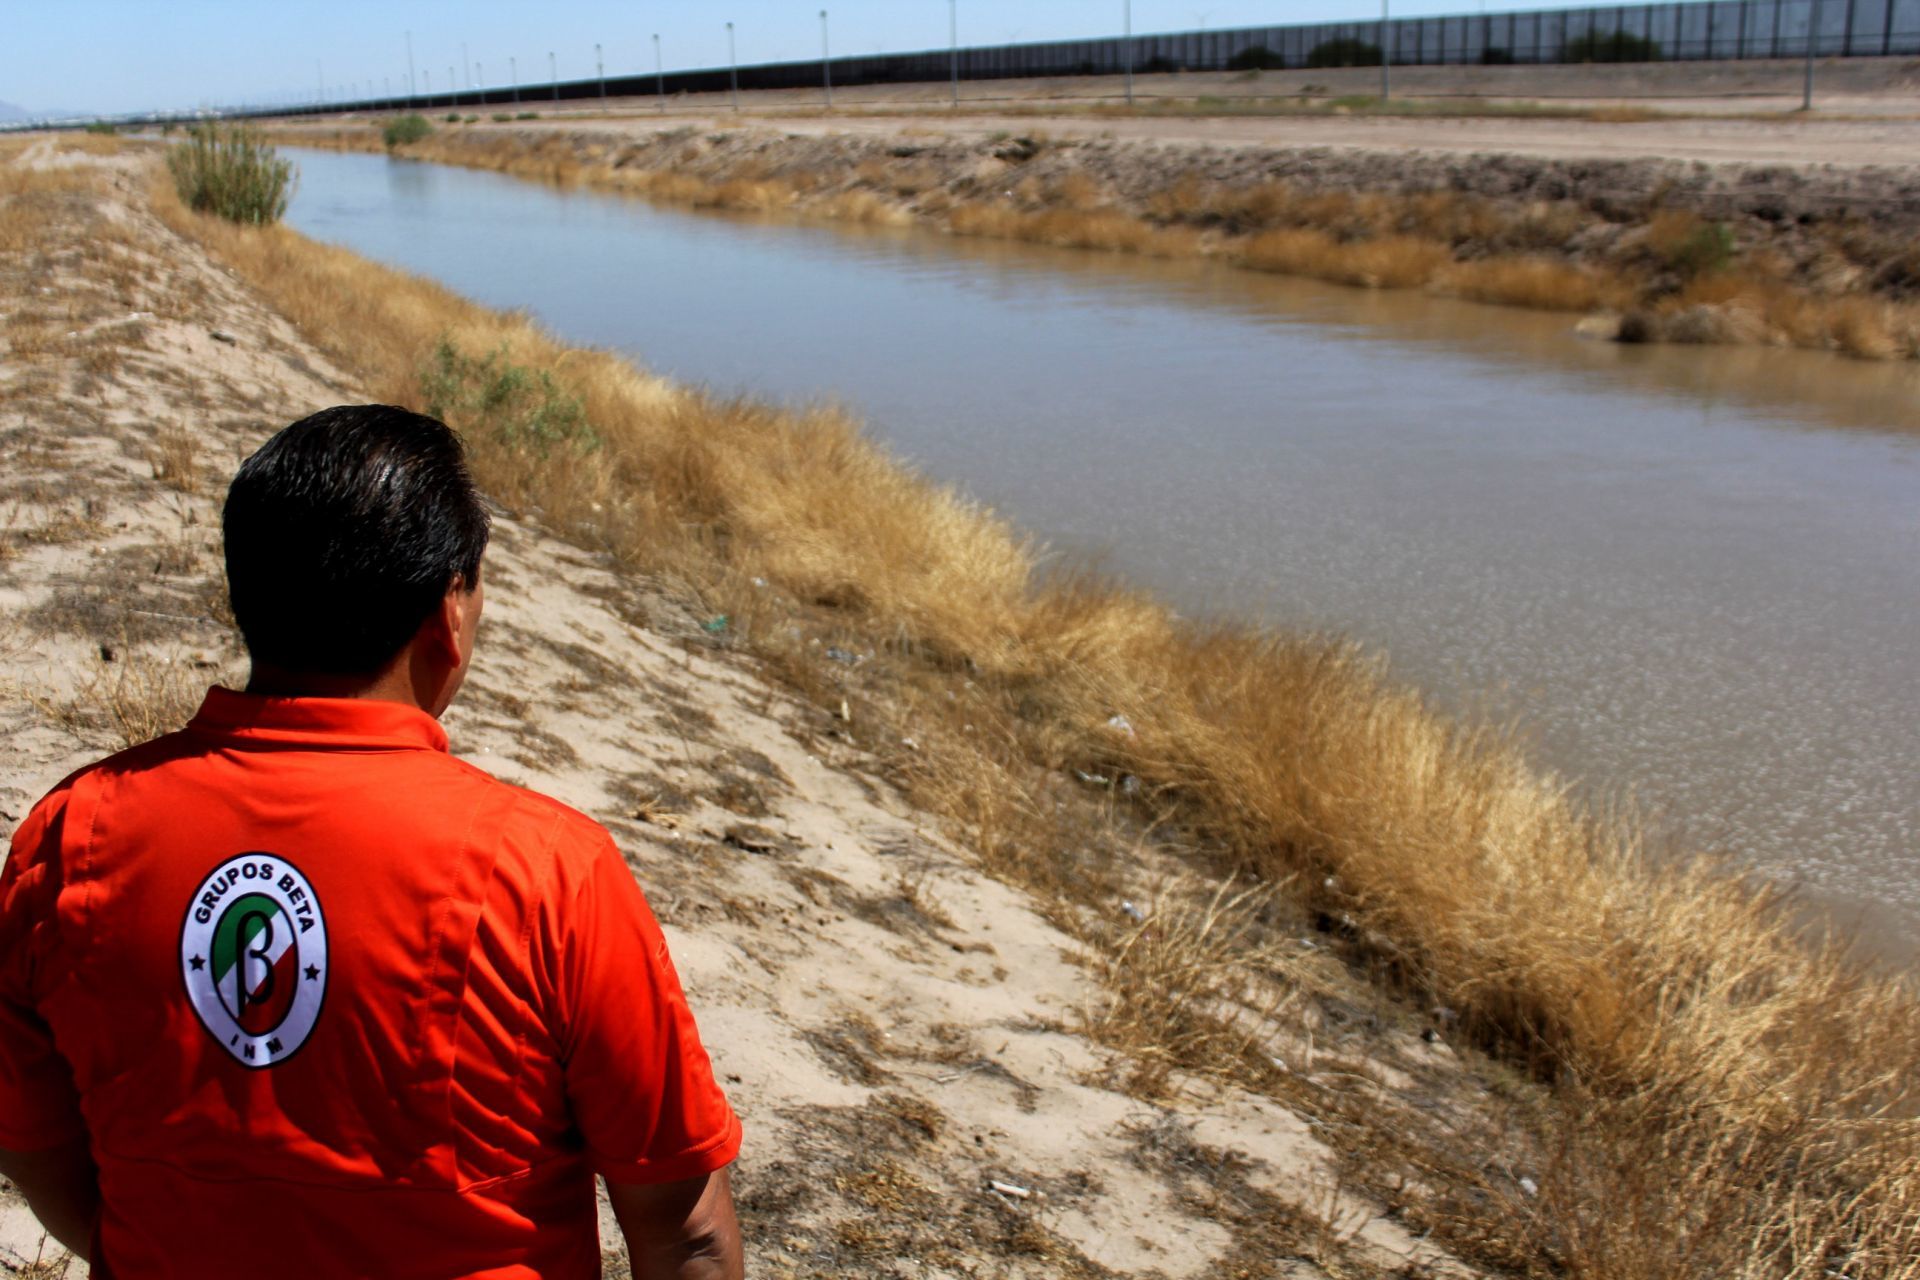 INM recovered the bodies of 3 migrants who drowned in the Rio Grande